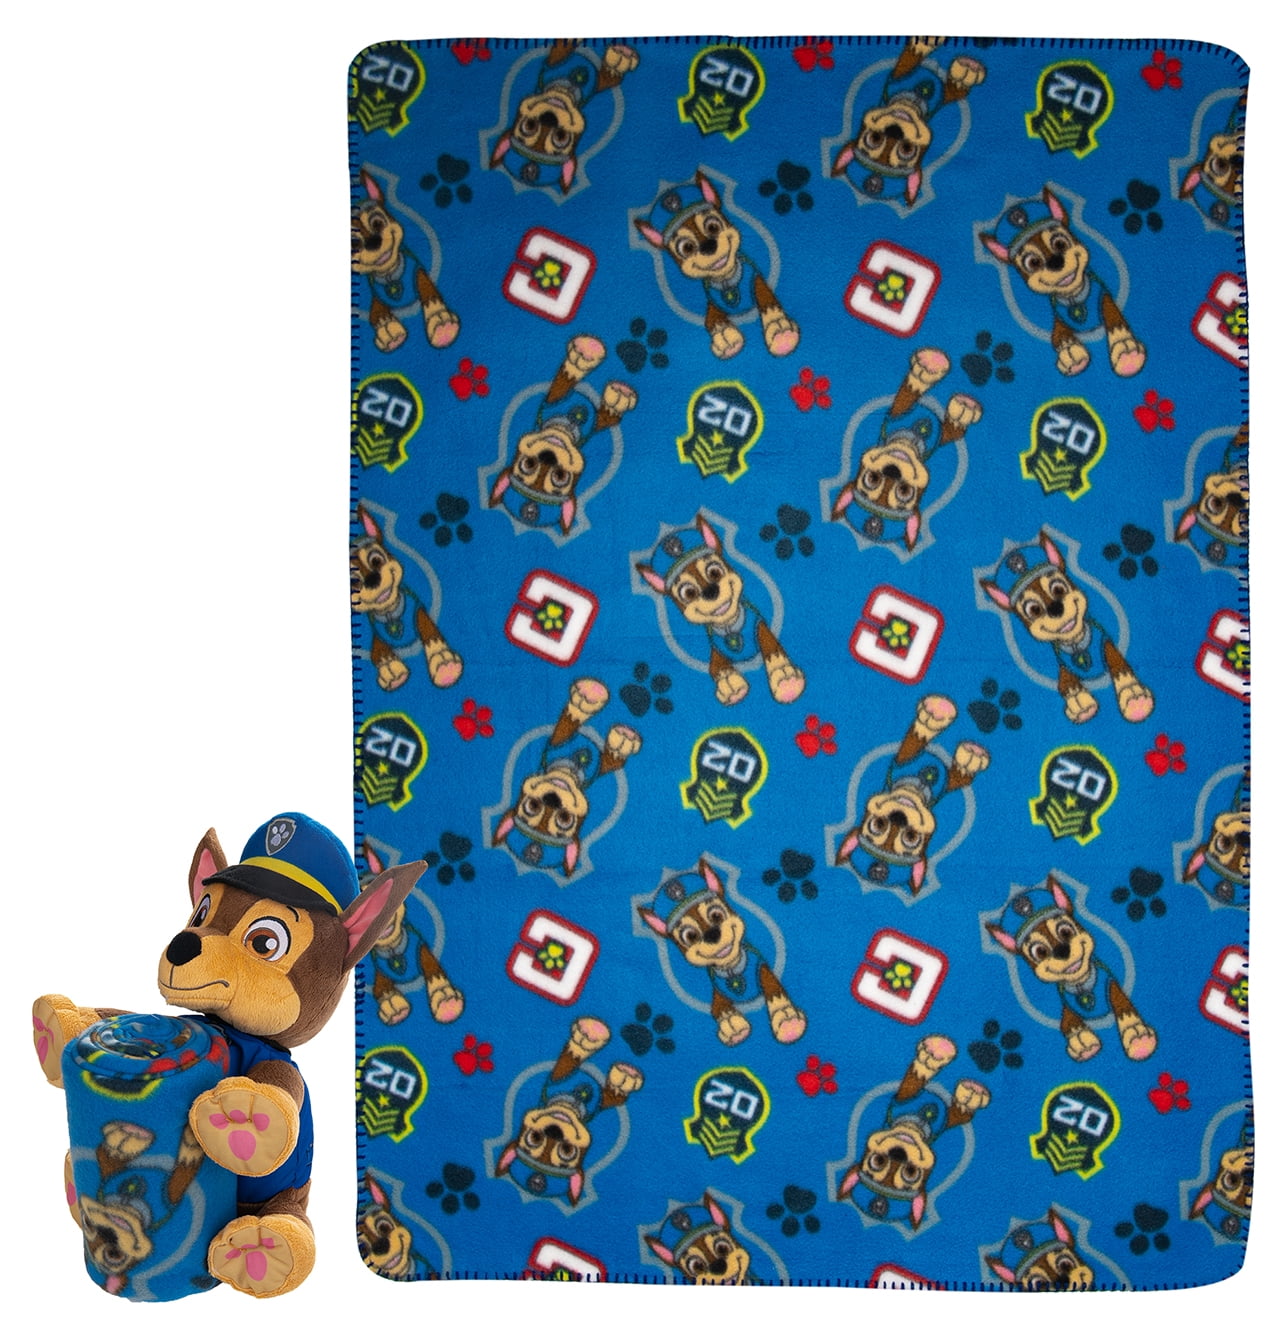 Chase Personalised Applique Soft Fleece Blanket Paw Patrol 